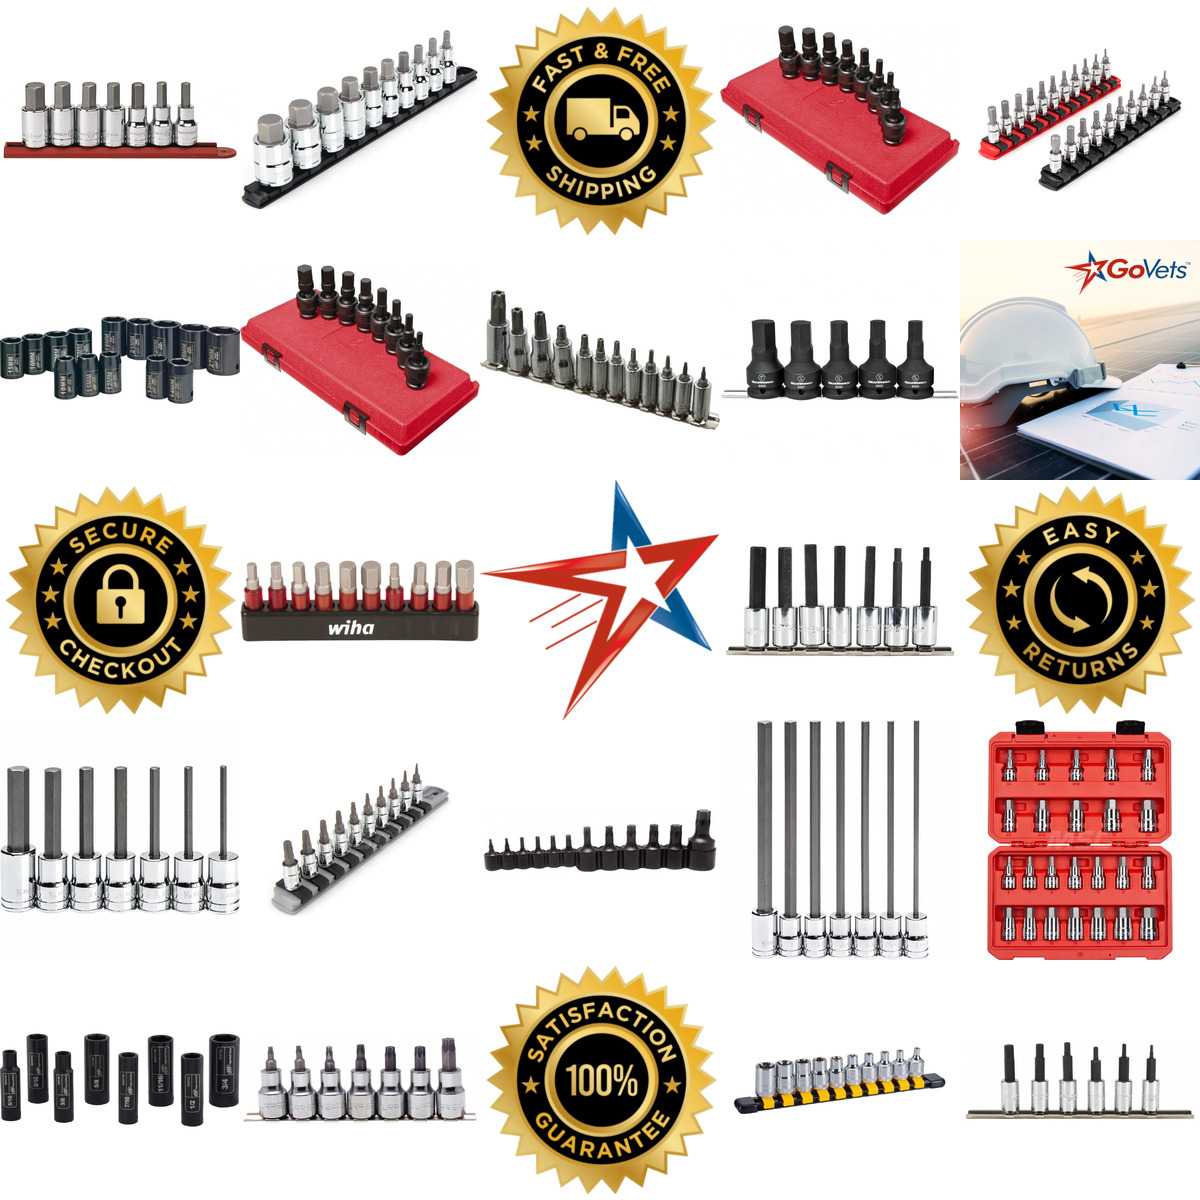 A selection of Hex and Torx Bit Socket Sets products on GoVets